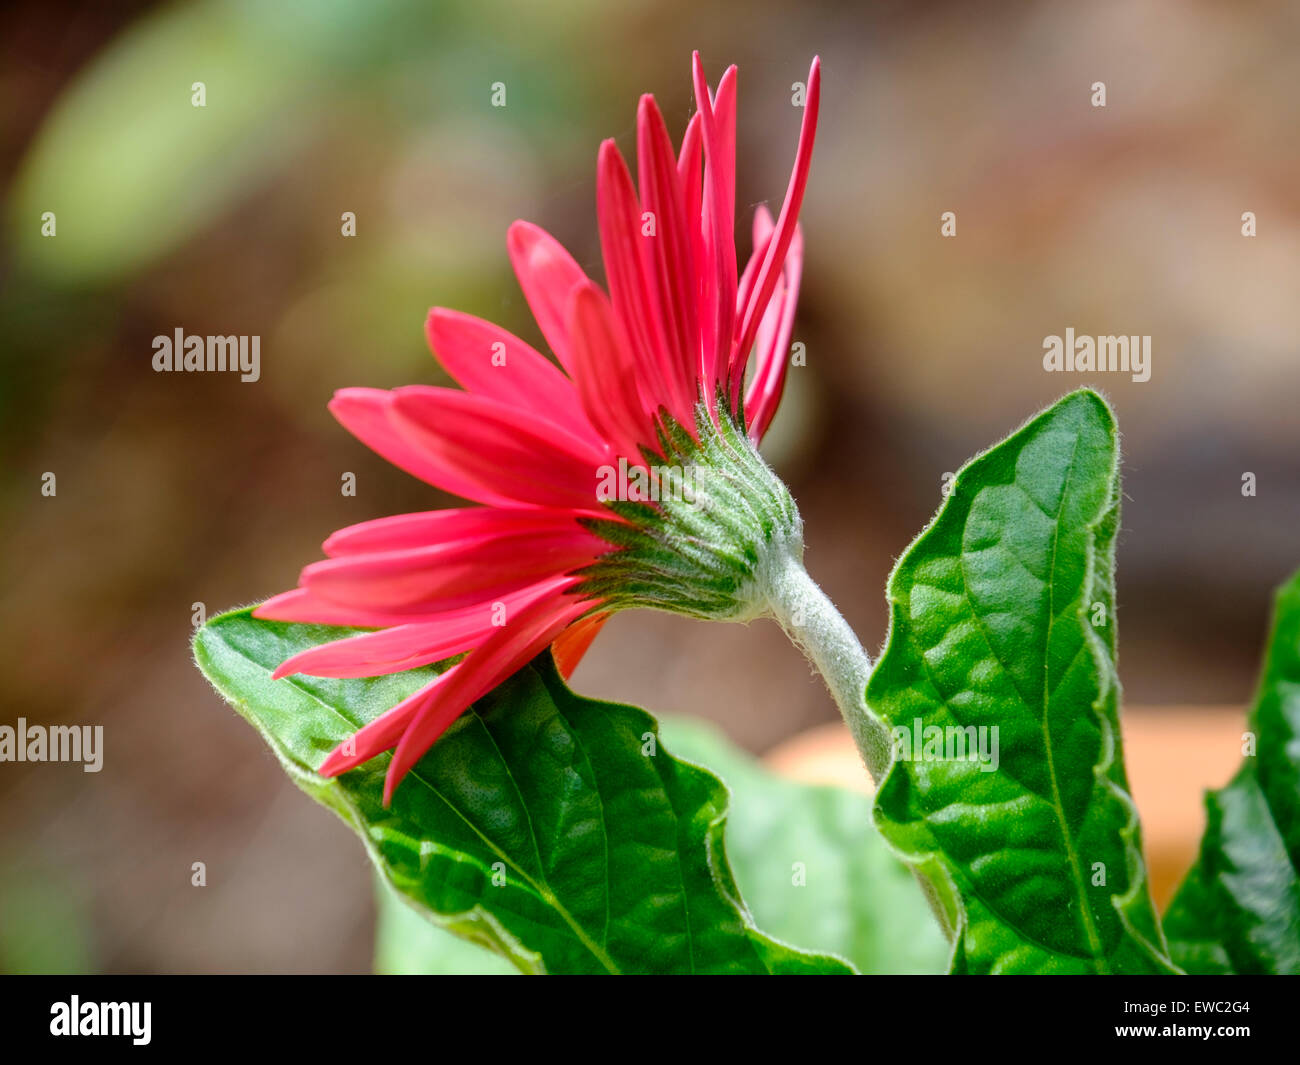 A deep pink Gerbera Daisy showing the backside, the sepal, of the flower. Oklahoma, USA. Stock Photo